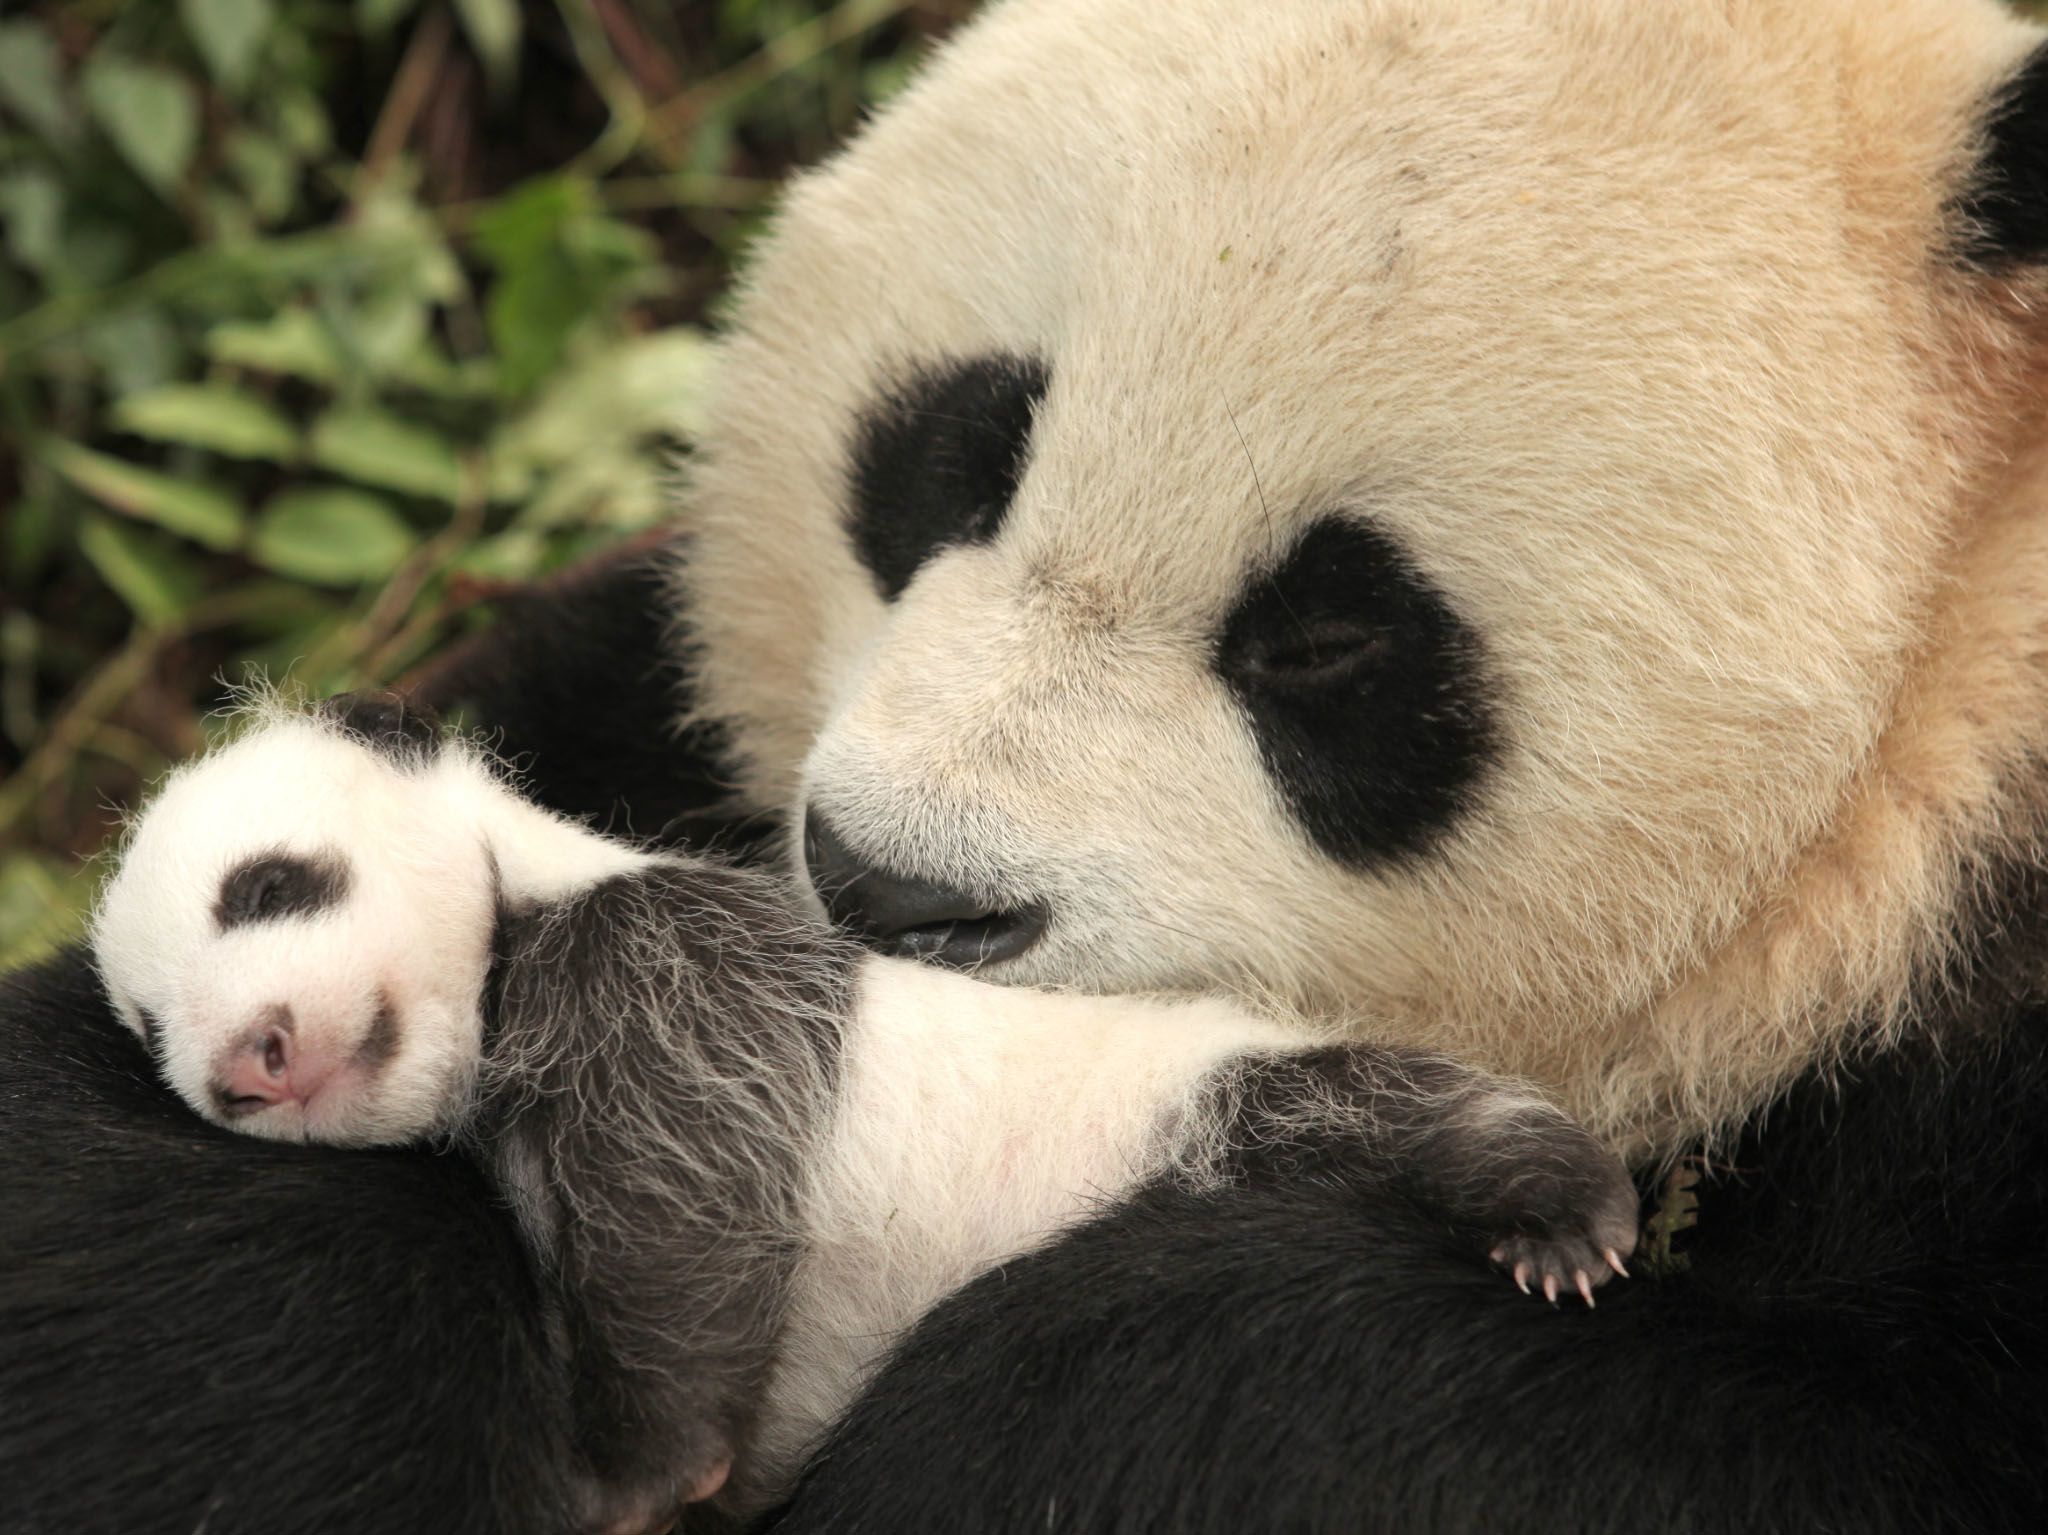 One-month-old panda and mum, Wolong. This image is from Panda goes wild. [Photo of the day - April 2021]